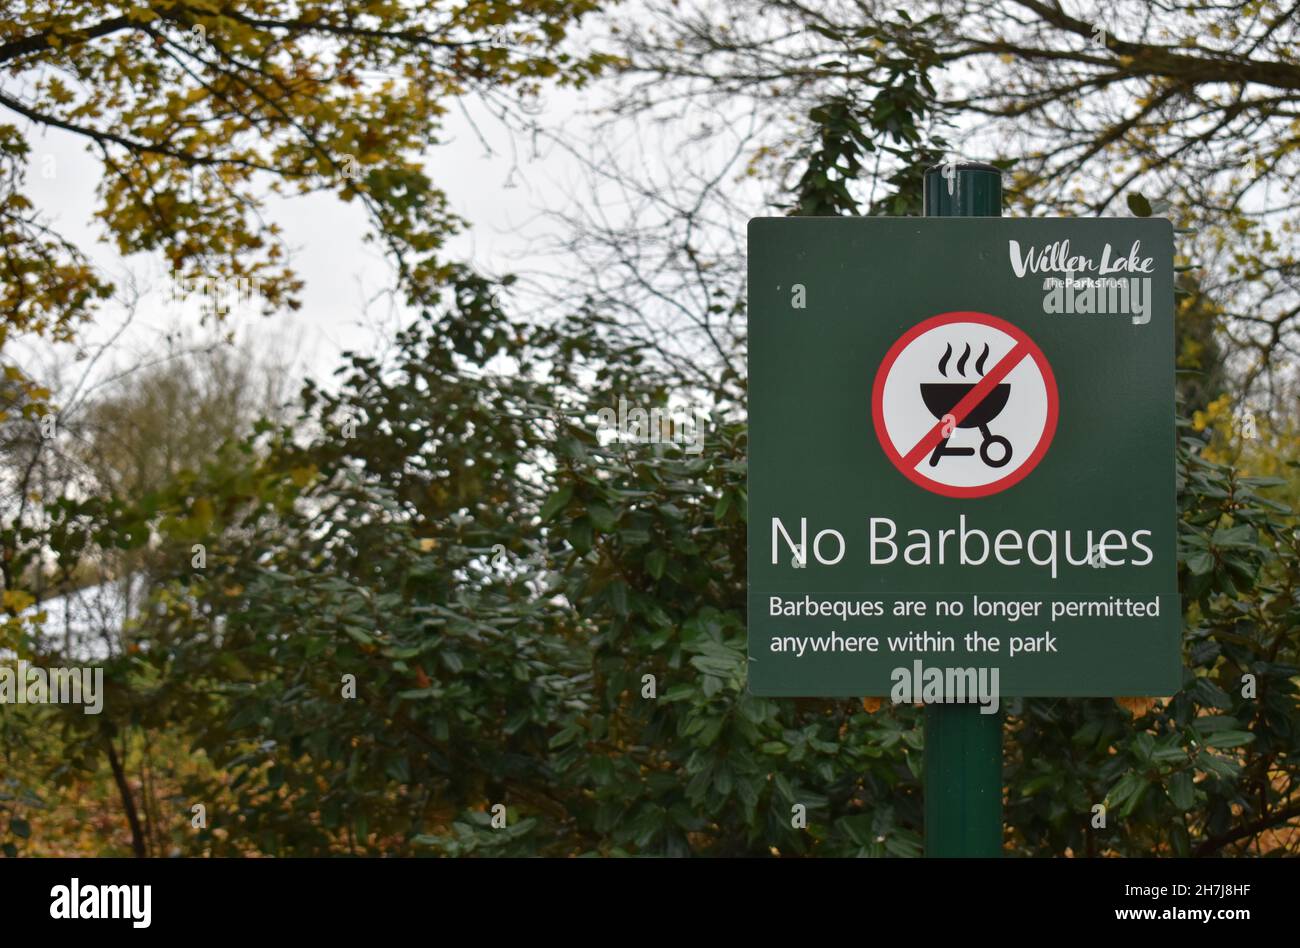 Sign: No Barbeques at Willen Lake, Milton Keynes. Stock Photo